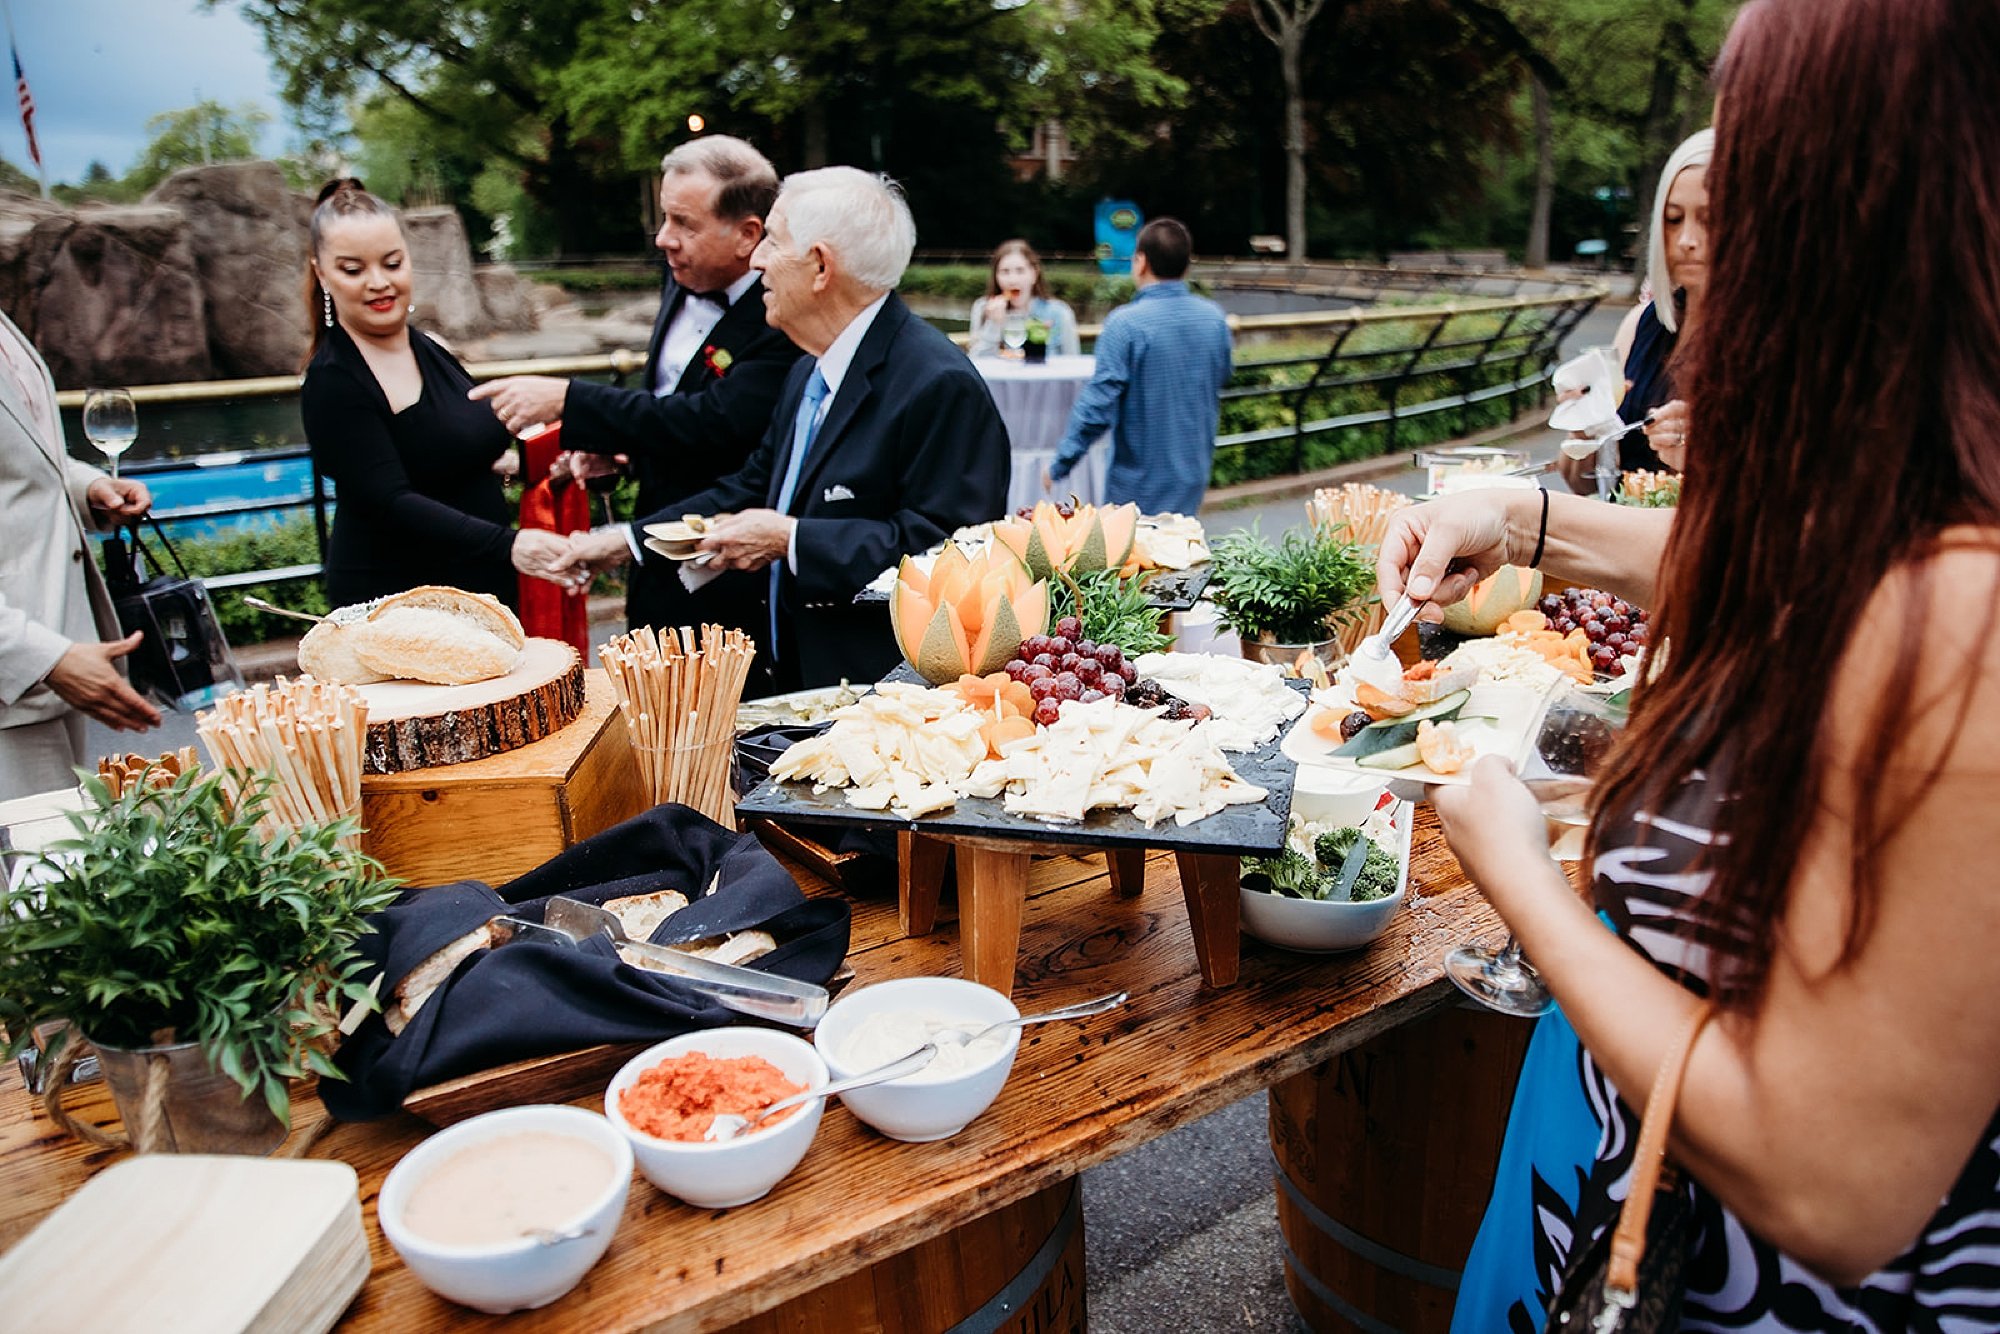 guests eat appetizers during The Bronx Zoo wedding reception